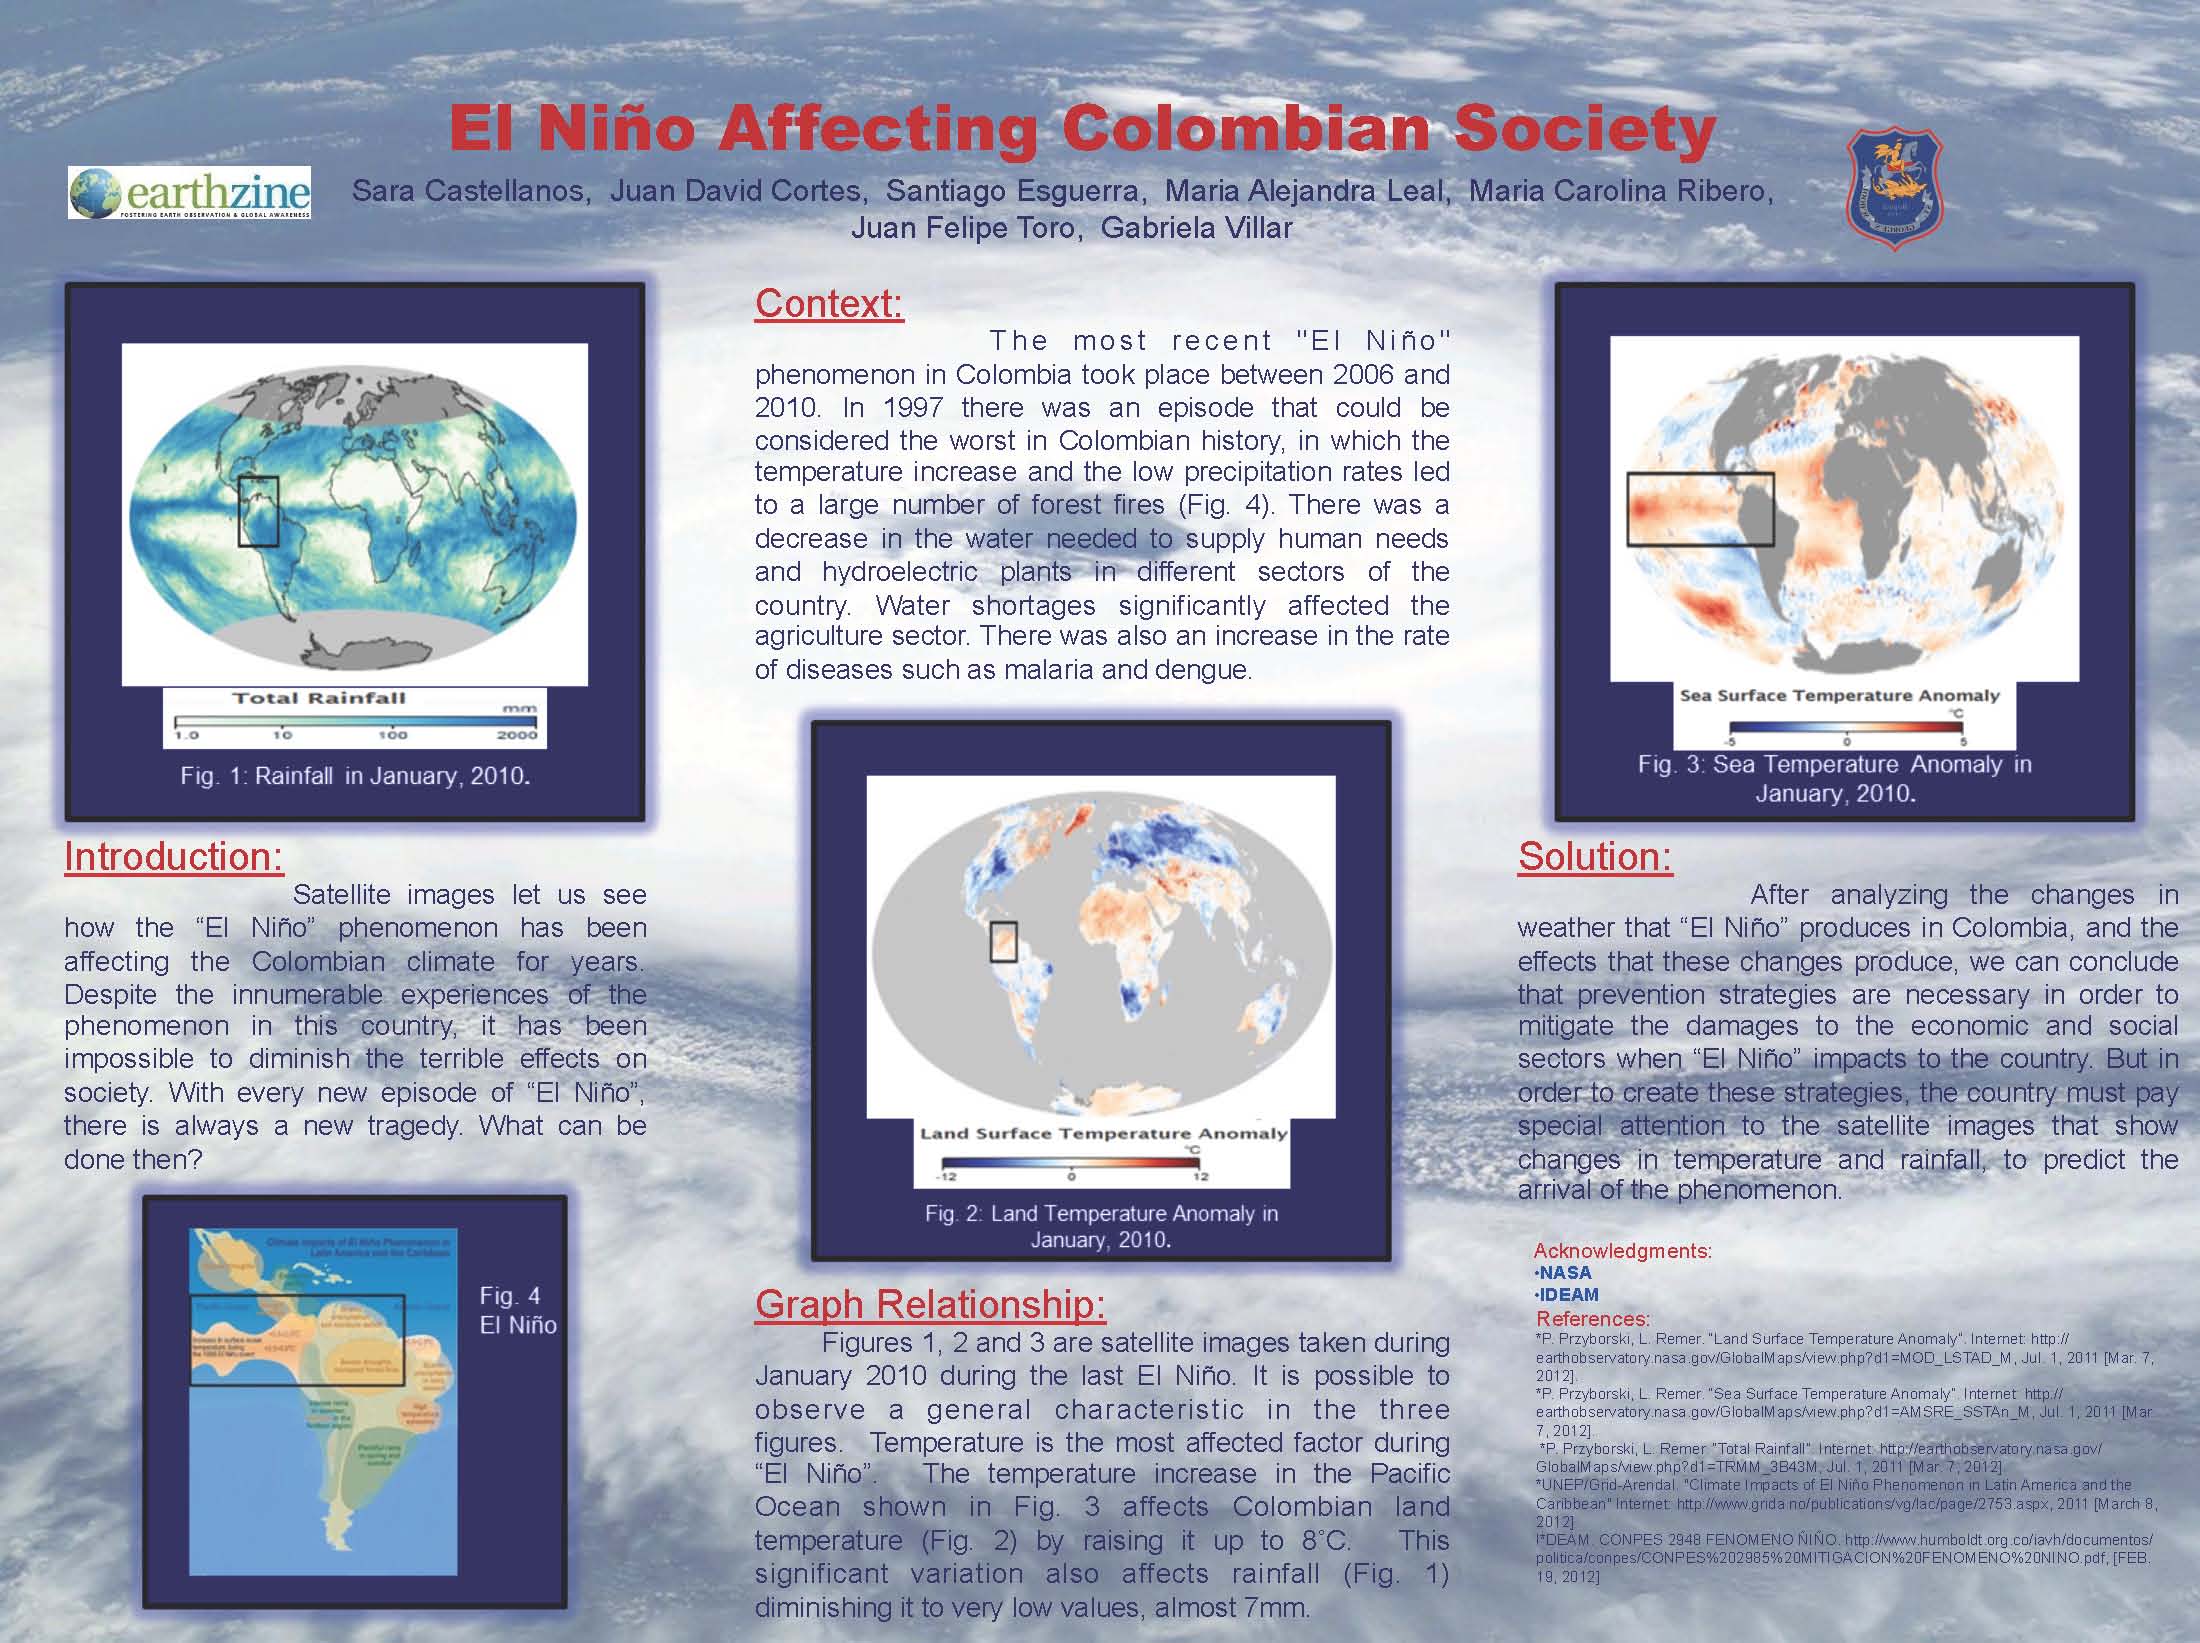 SGS Earth Observation Climate themed poster